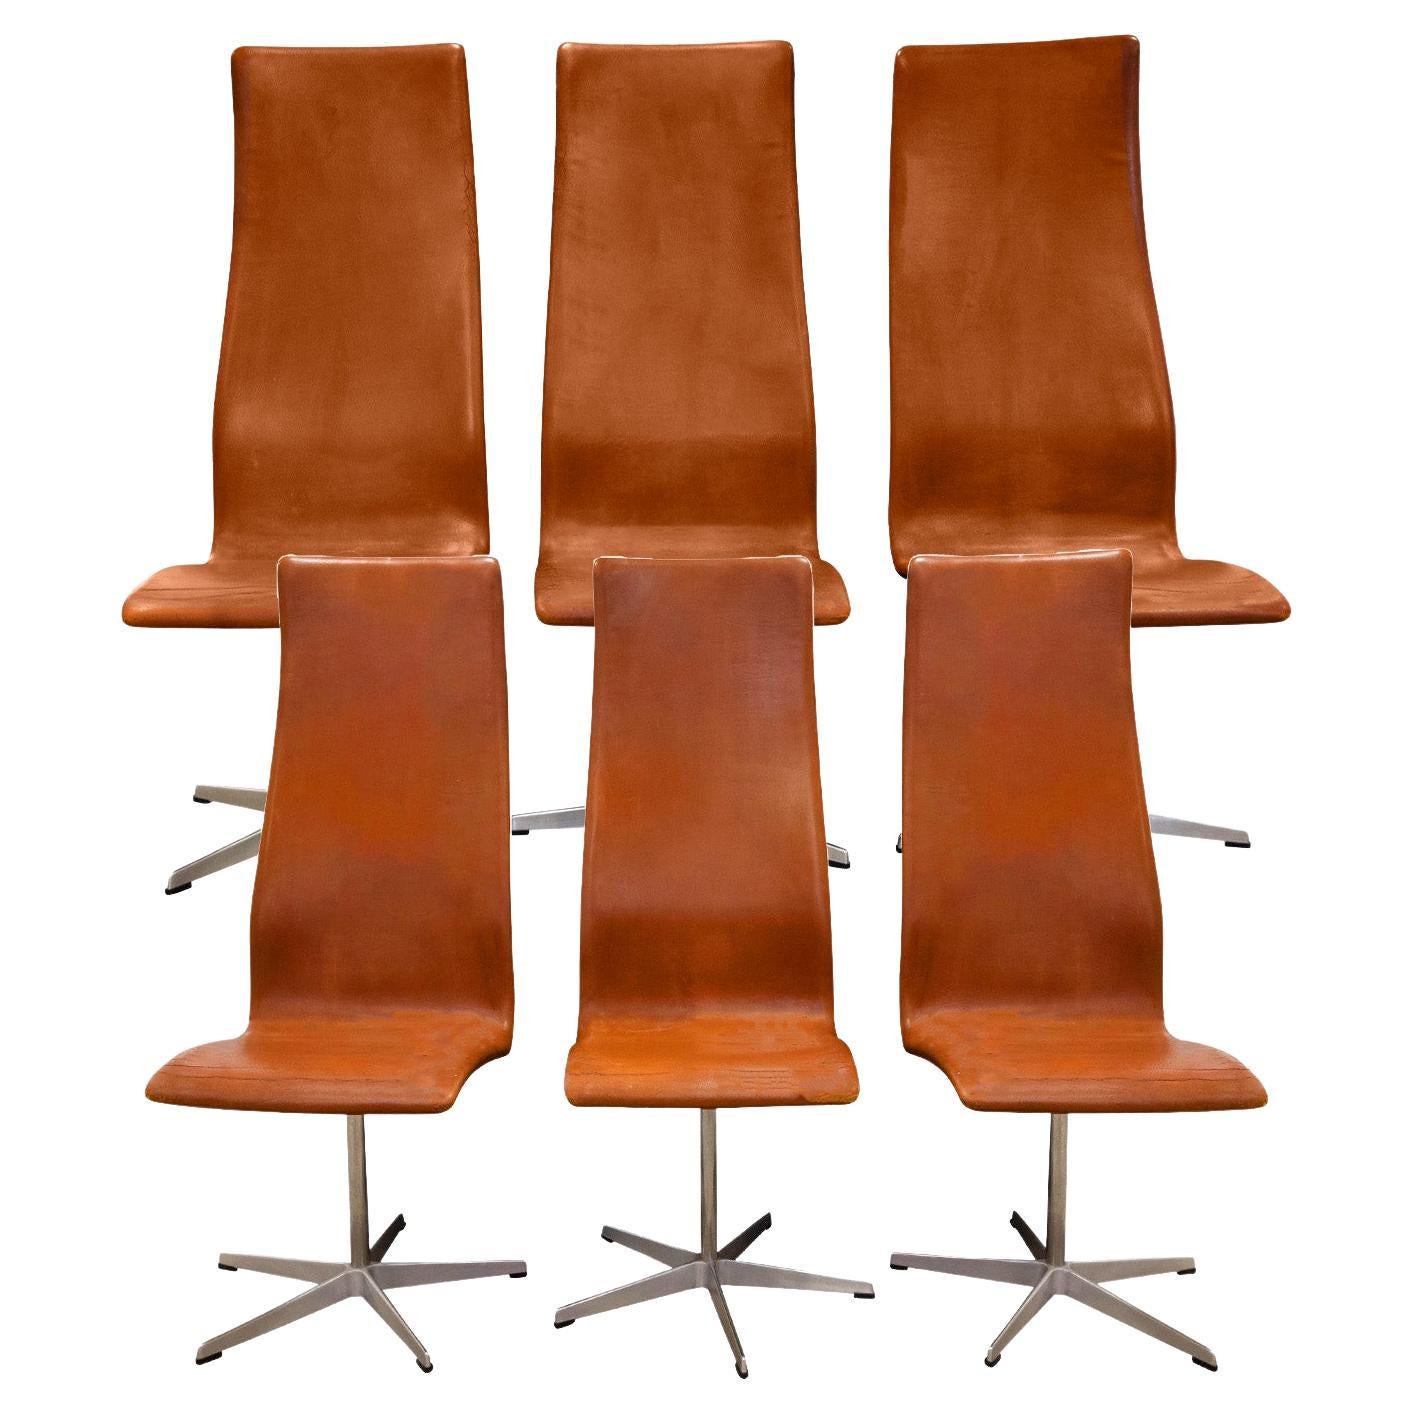 Arne Jacobson Set of 6 High Back Dining Chairs in Camel Leather 1960s, 'Signed'